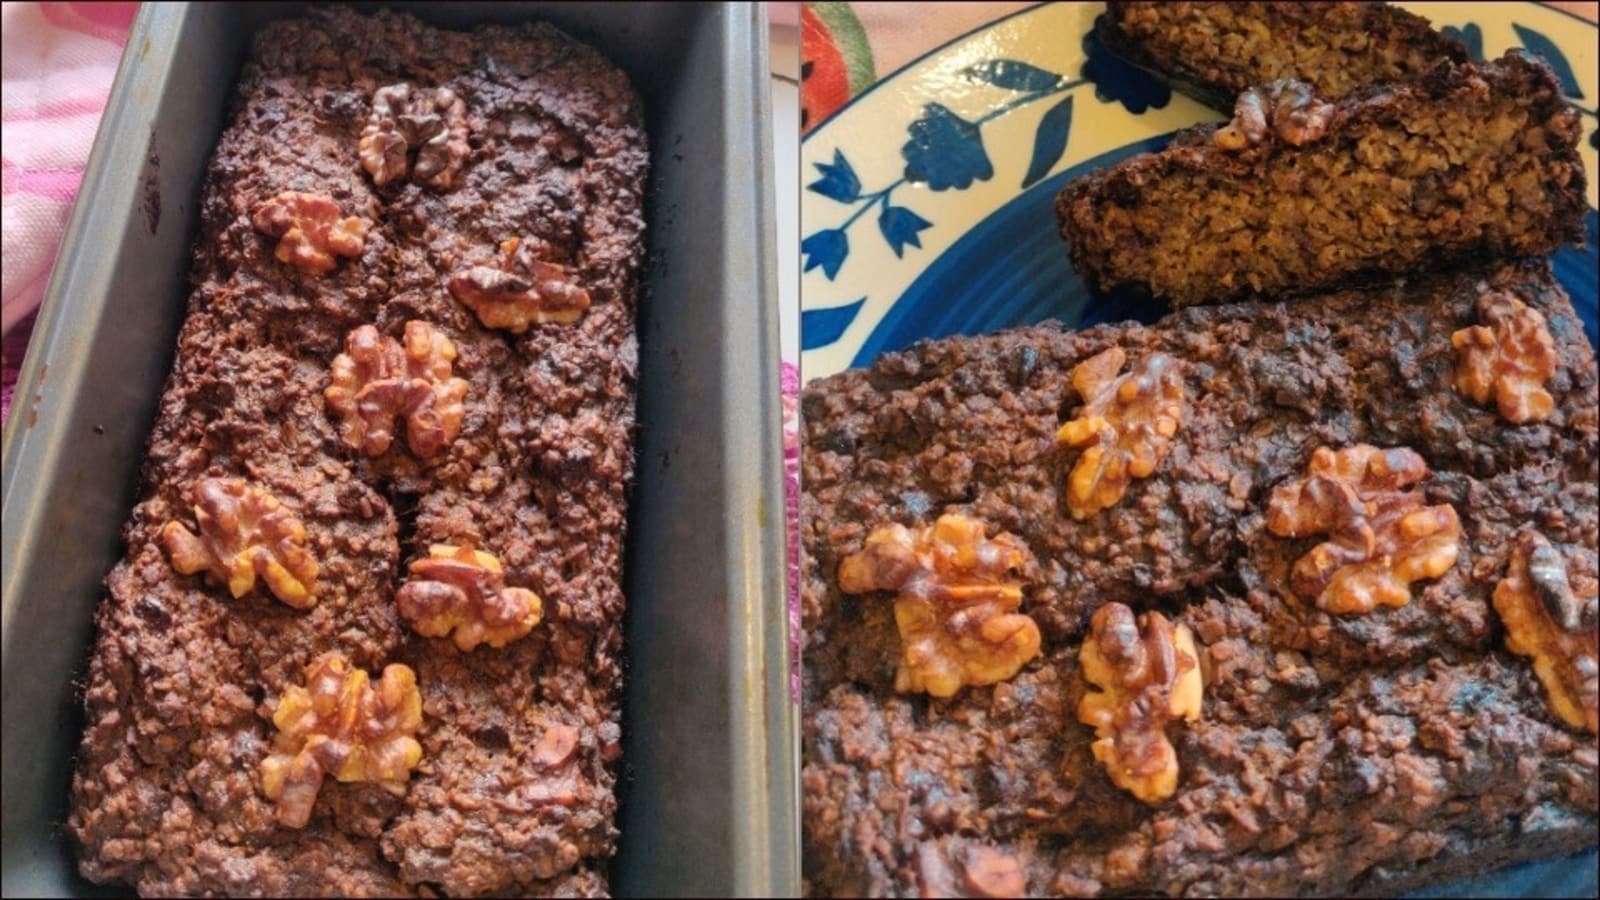 Hindi News: Recipe: This Coffee Walnut Banana Bread will give the right kick to your morning